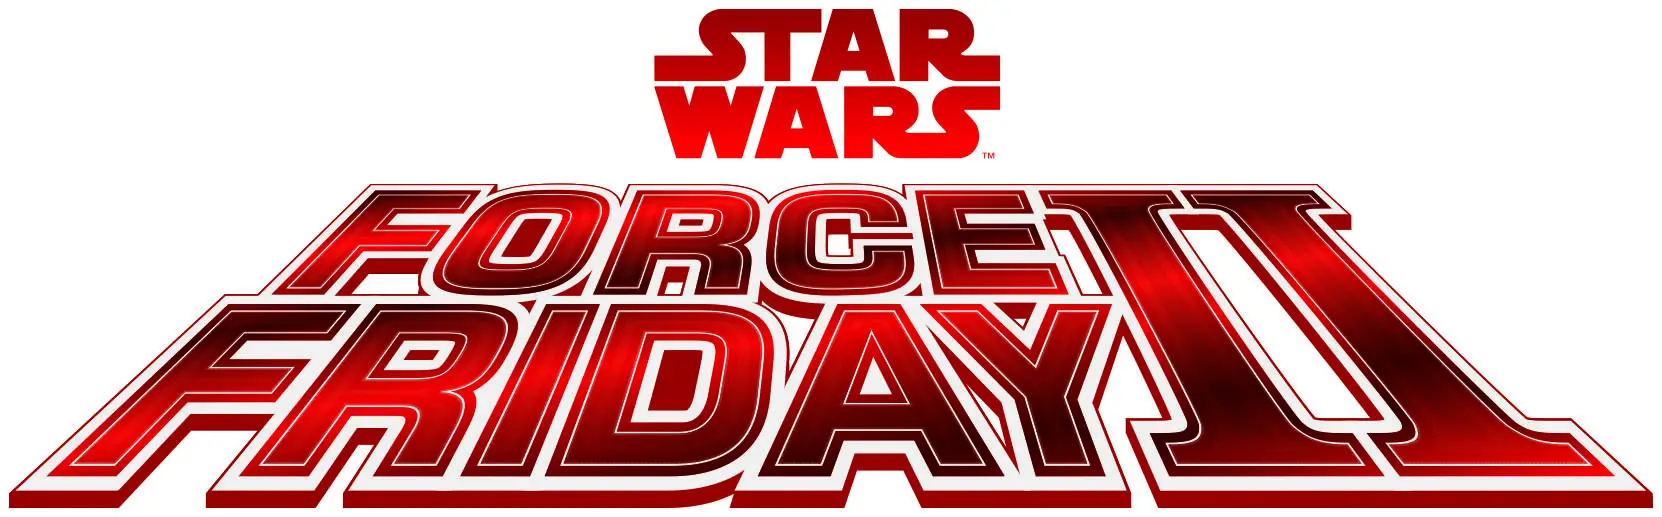 Star Wars Force Friday II Hits Stores Globally on September 1, 2017